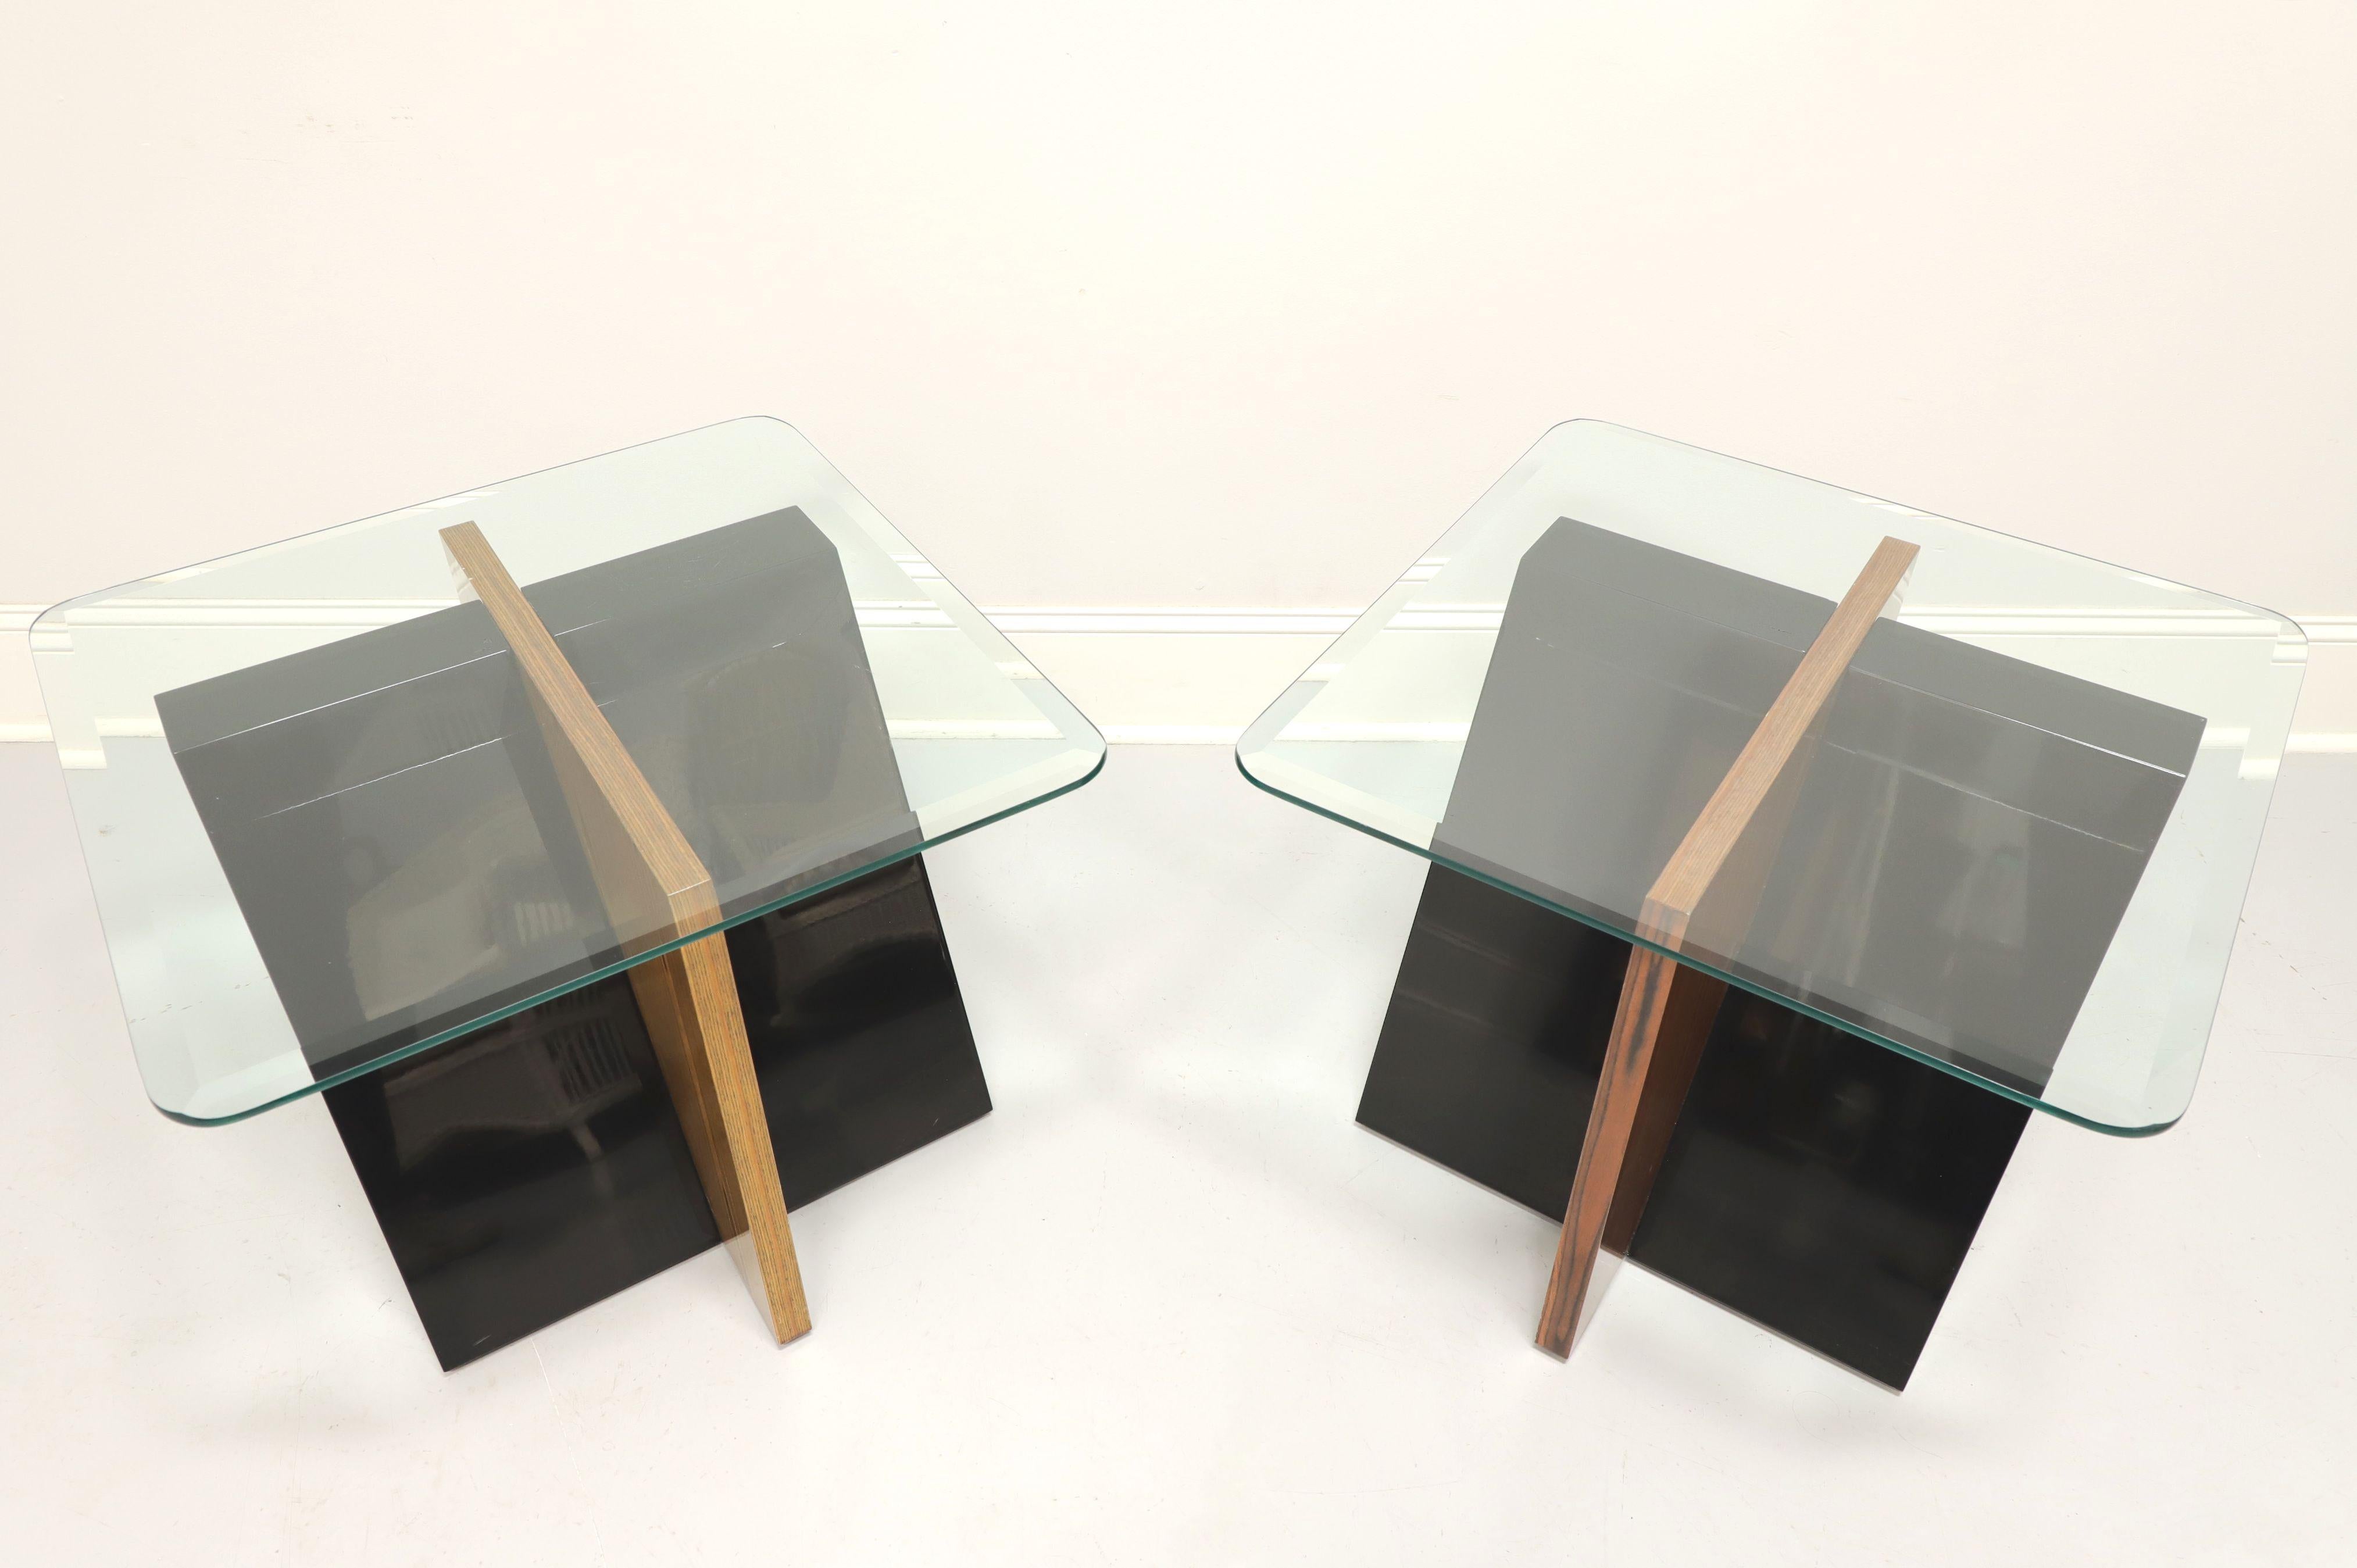 A pair of Contemporary glass top end tables by Gordon's Furniture, of Johnson City, Tennessee, USA. Acrylic and hardwood base in a slanted crossed 